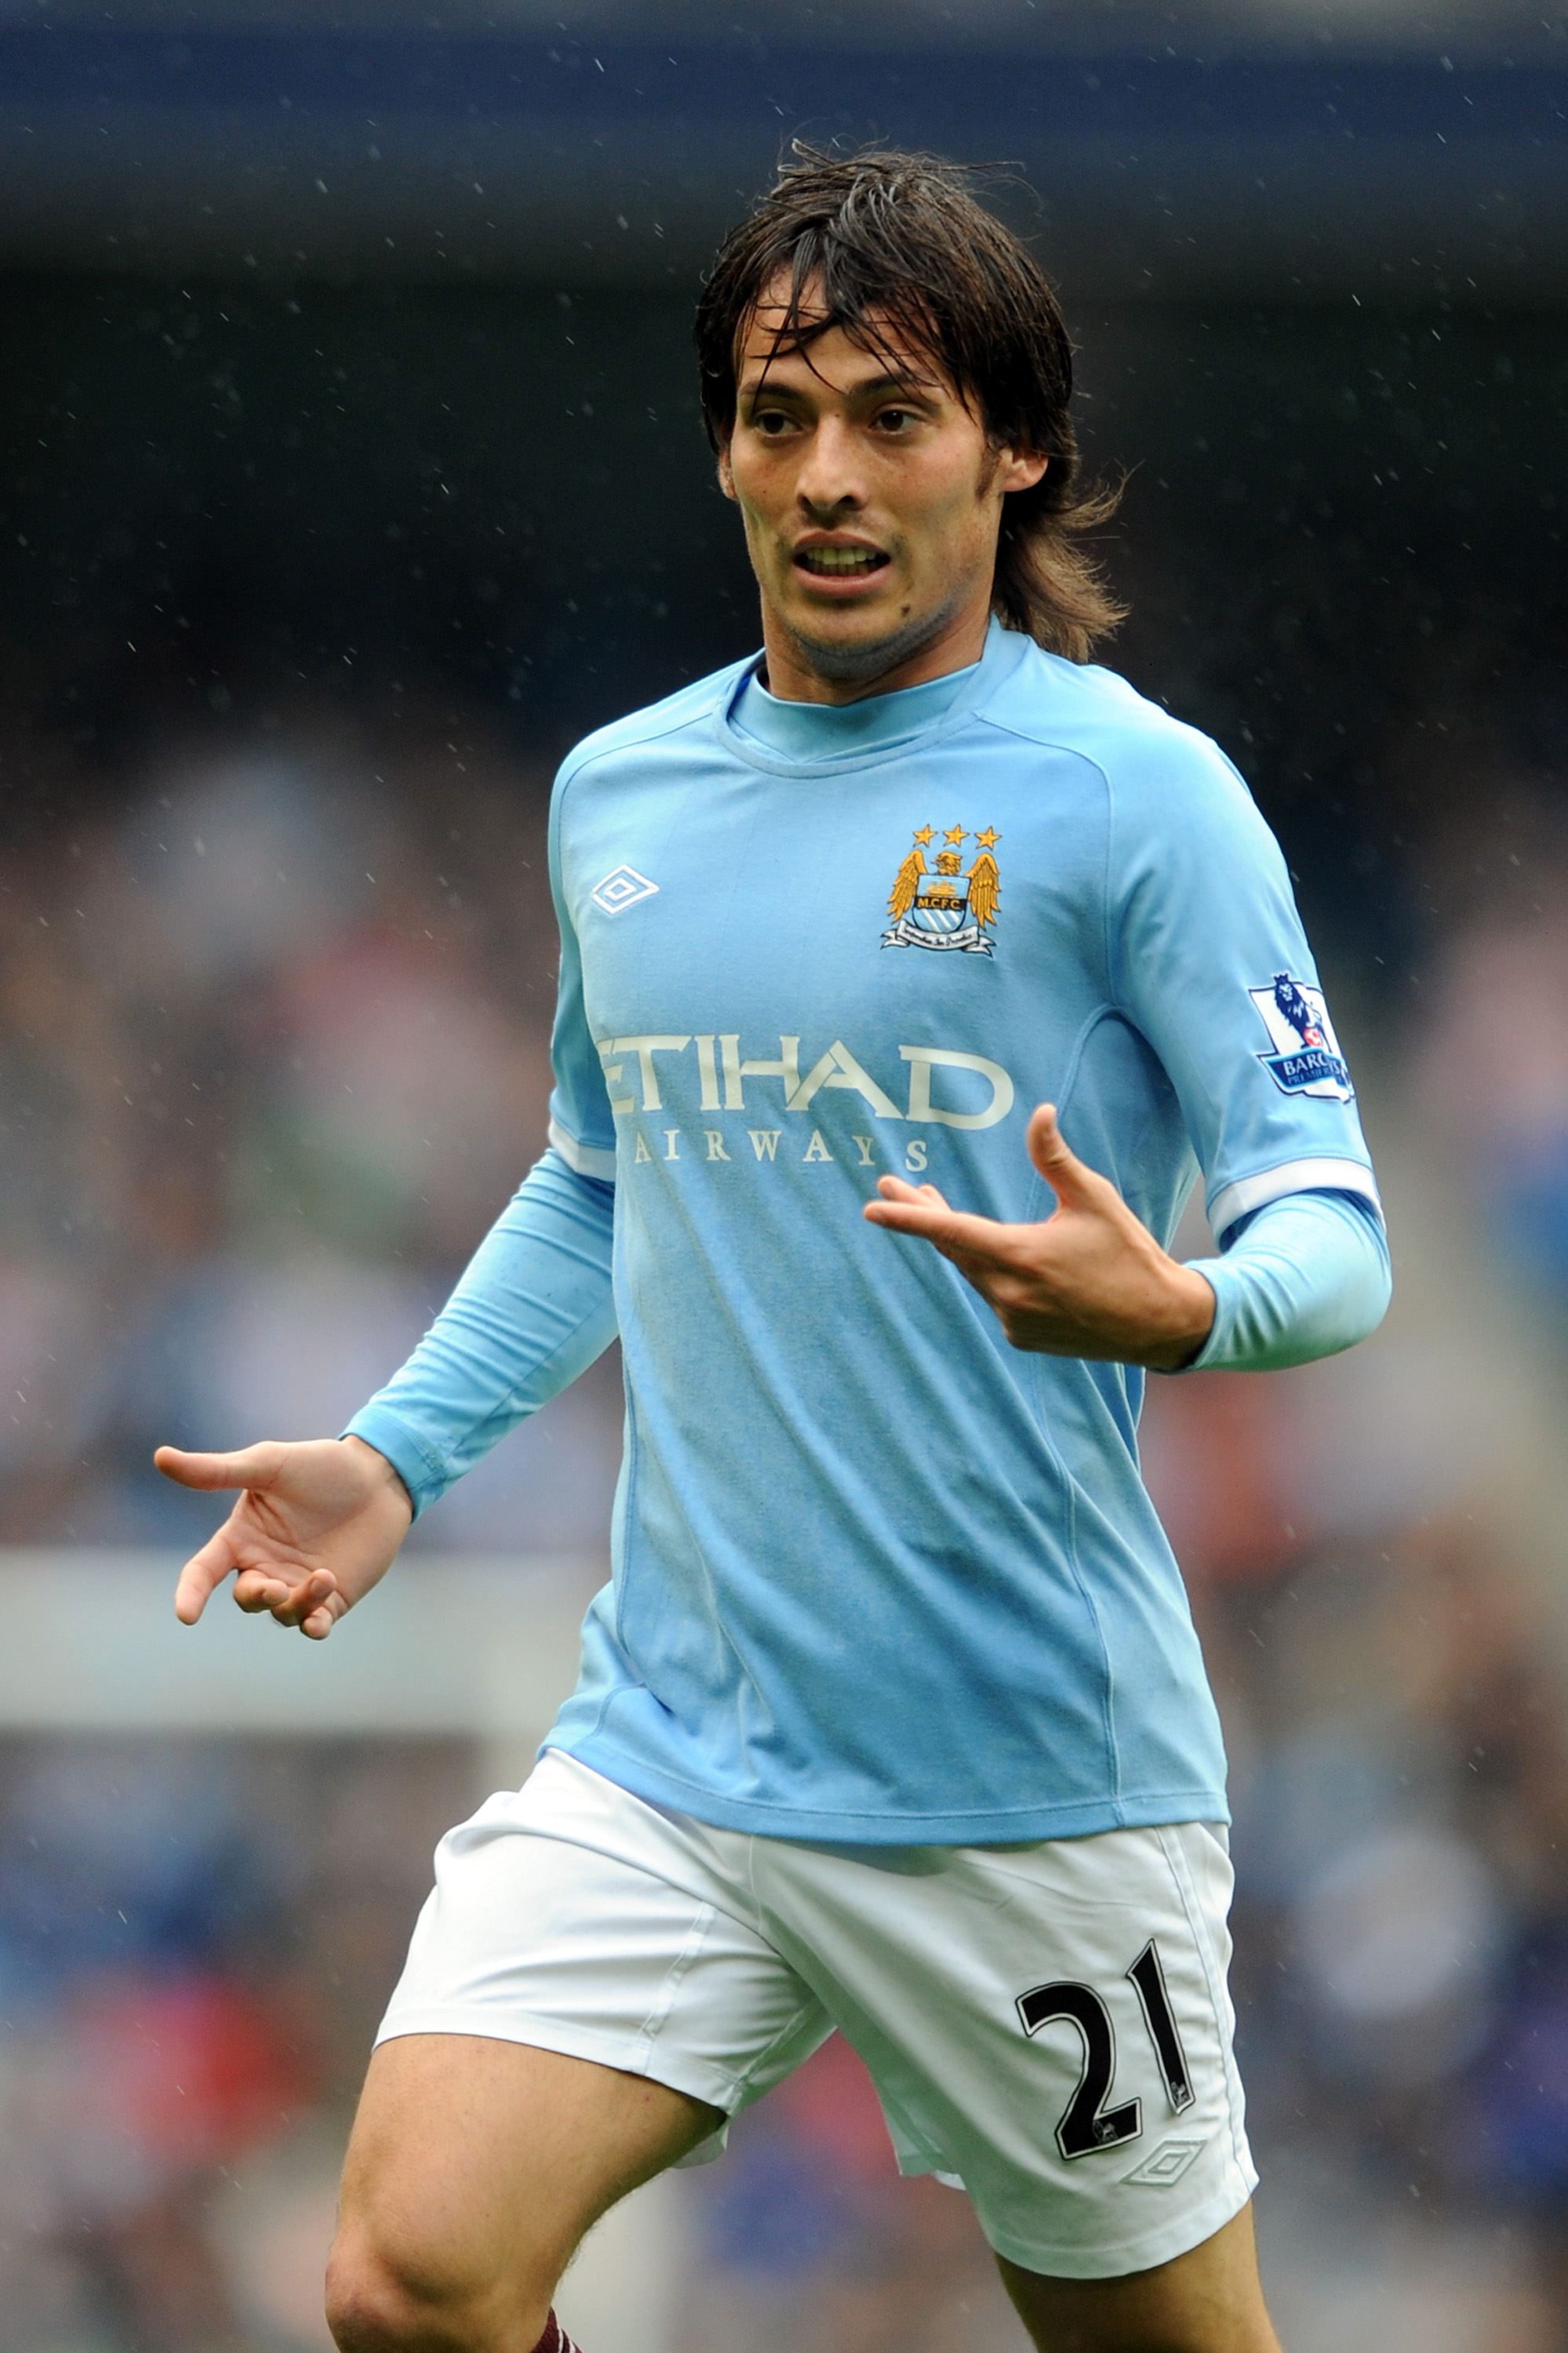 MANCHESTER, ENGLAND - OCTOBER 03:  David Silva of Manchester City during the Barclays Premier League match between Manchester City and Newcastle United at City of Manchester Stadium on October 3, 2010 in Manchester, England.  (Photo by Chris Brunskill/Get